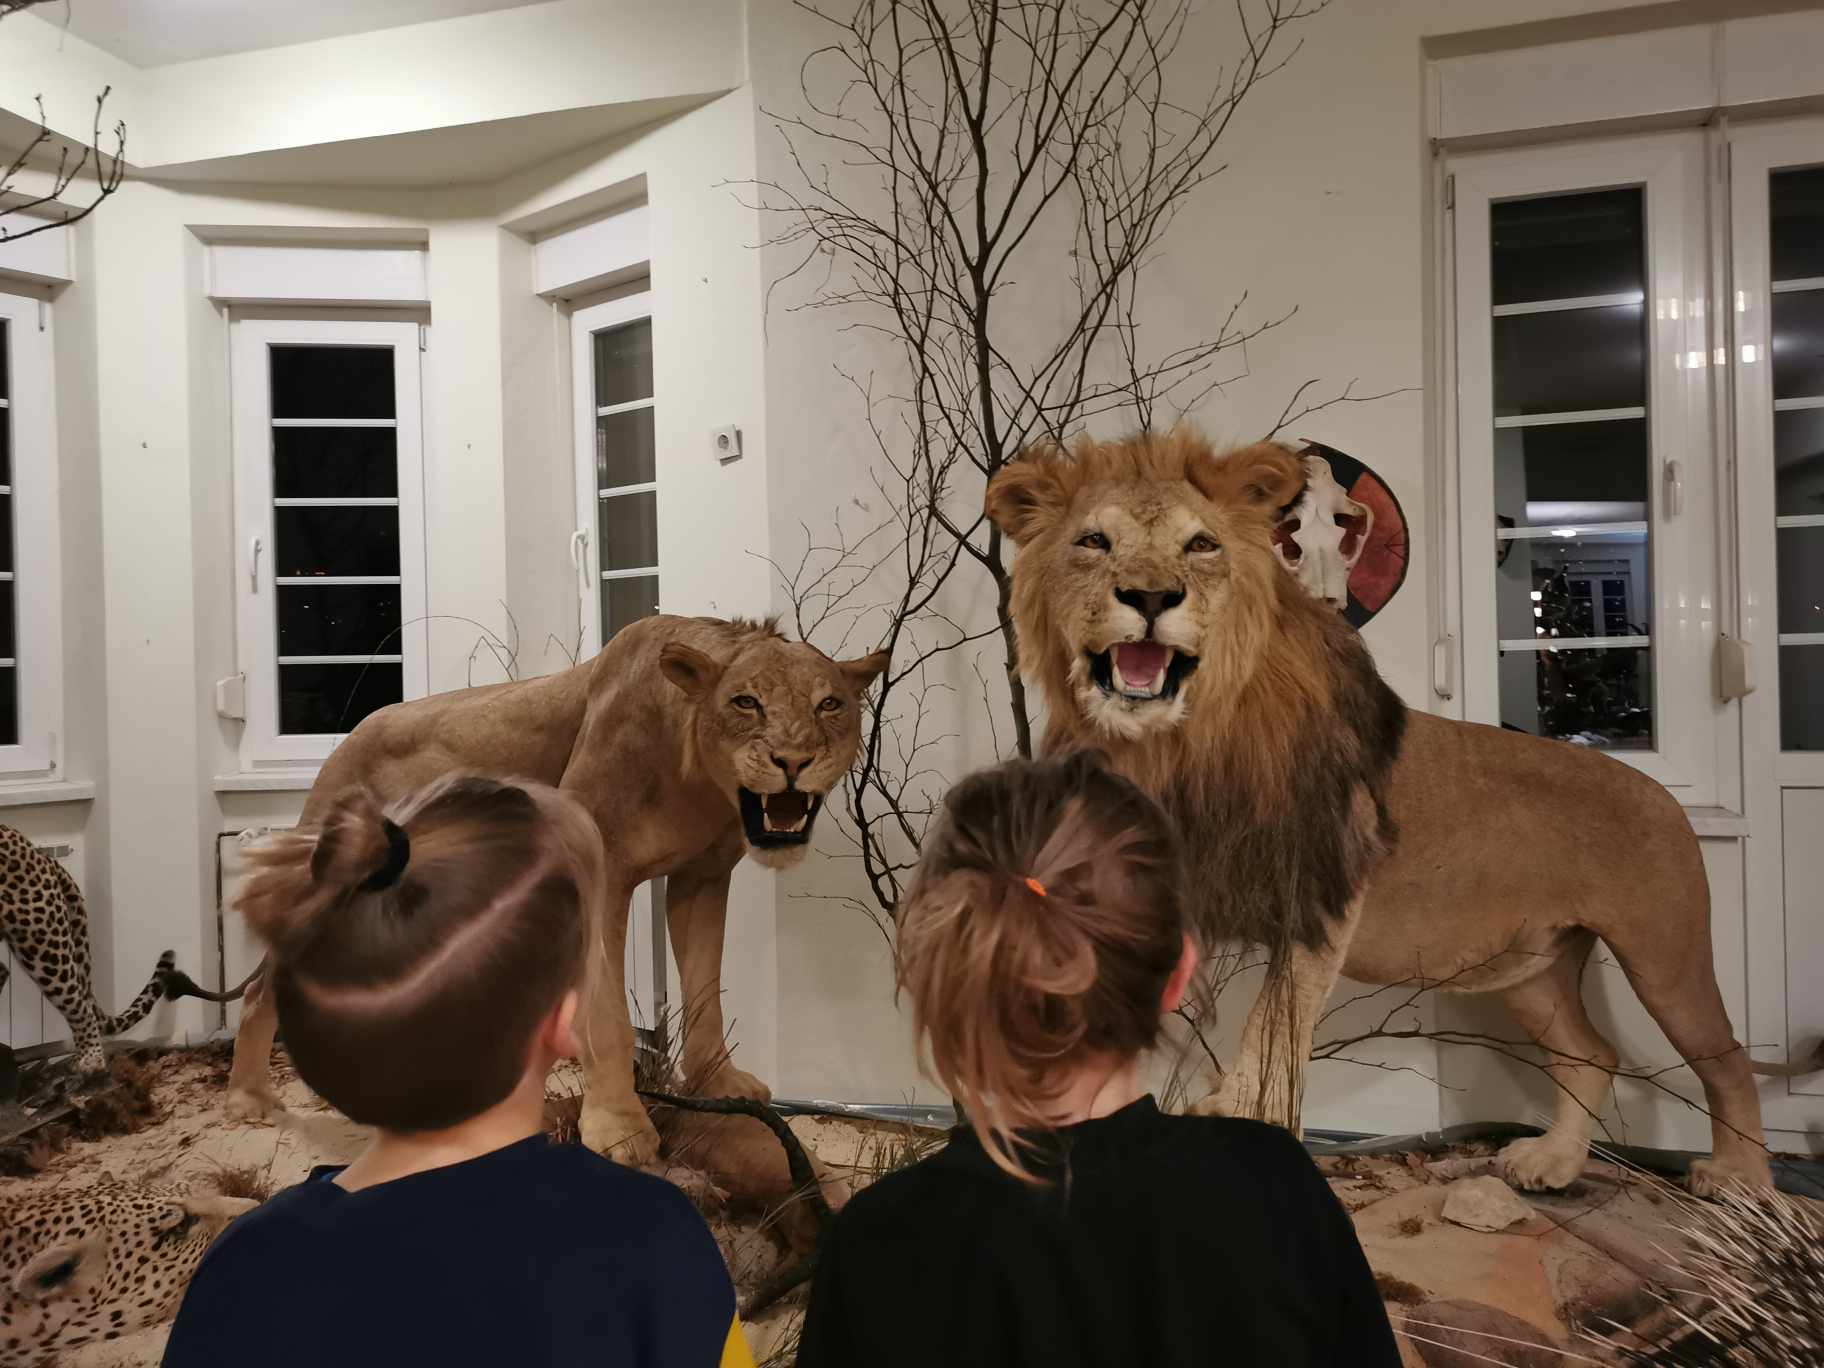 lions in the hunting museum